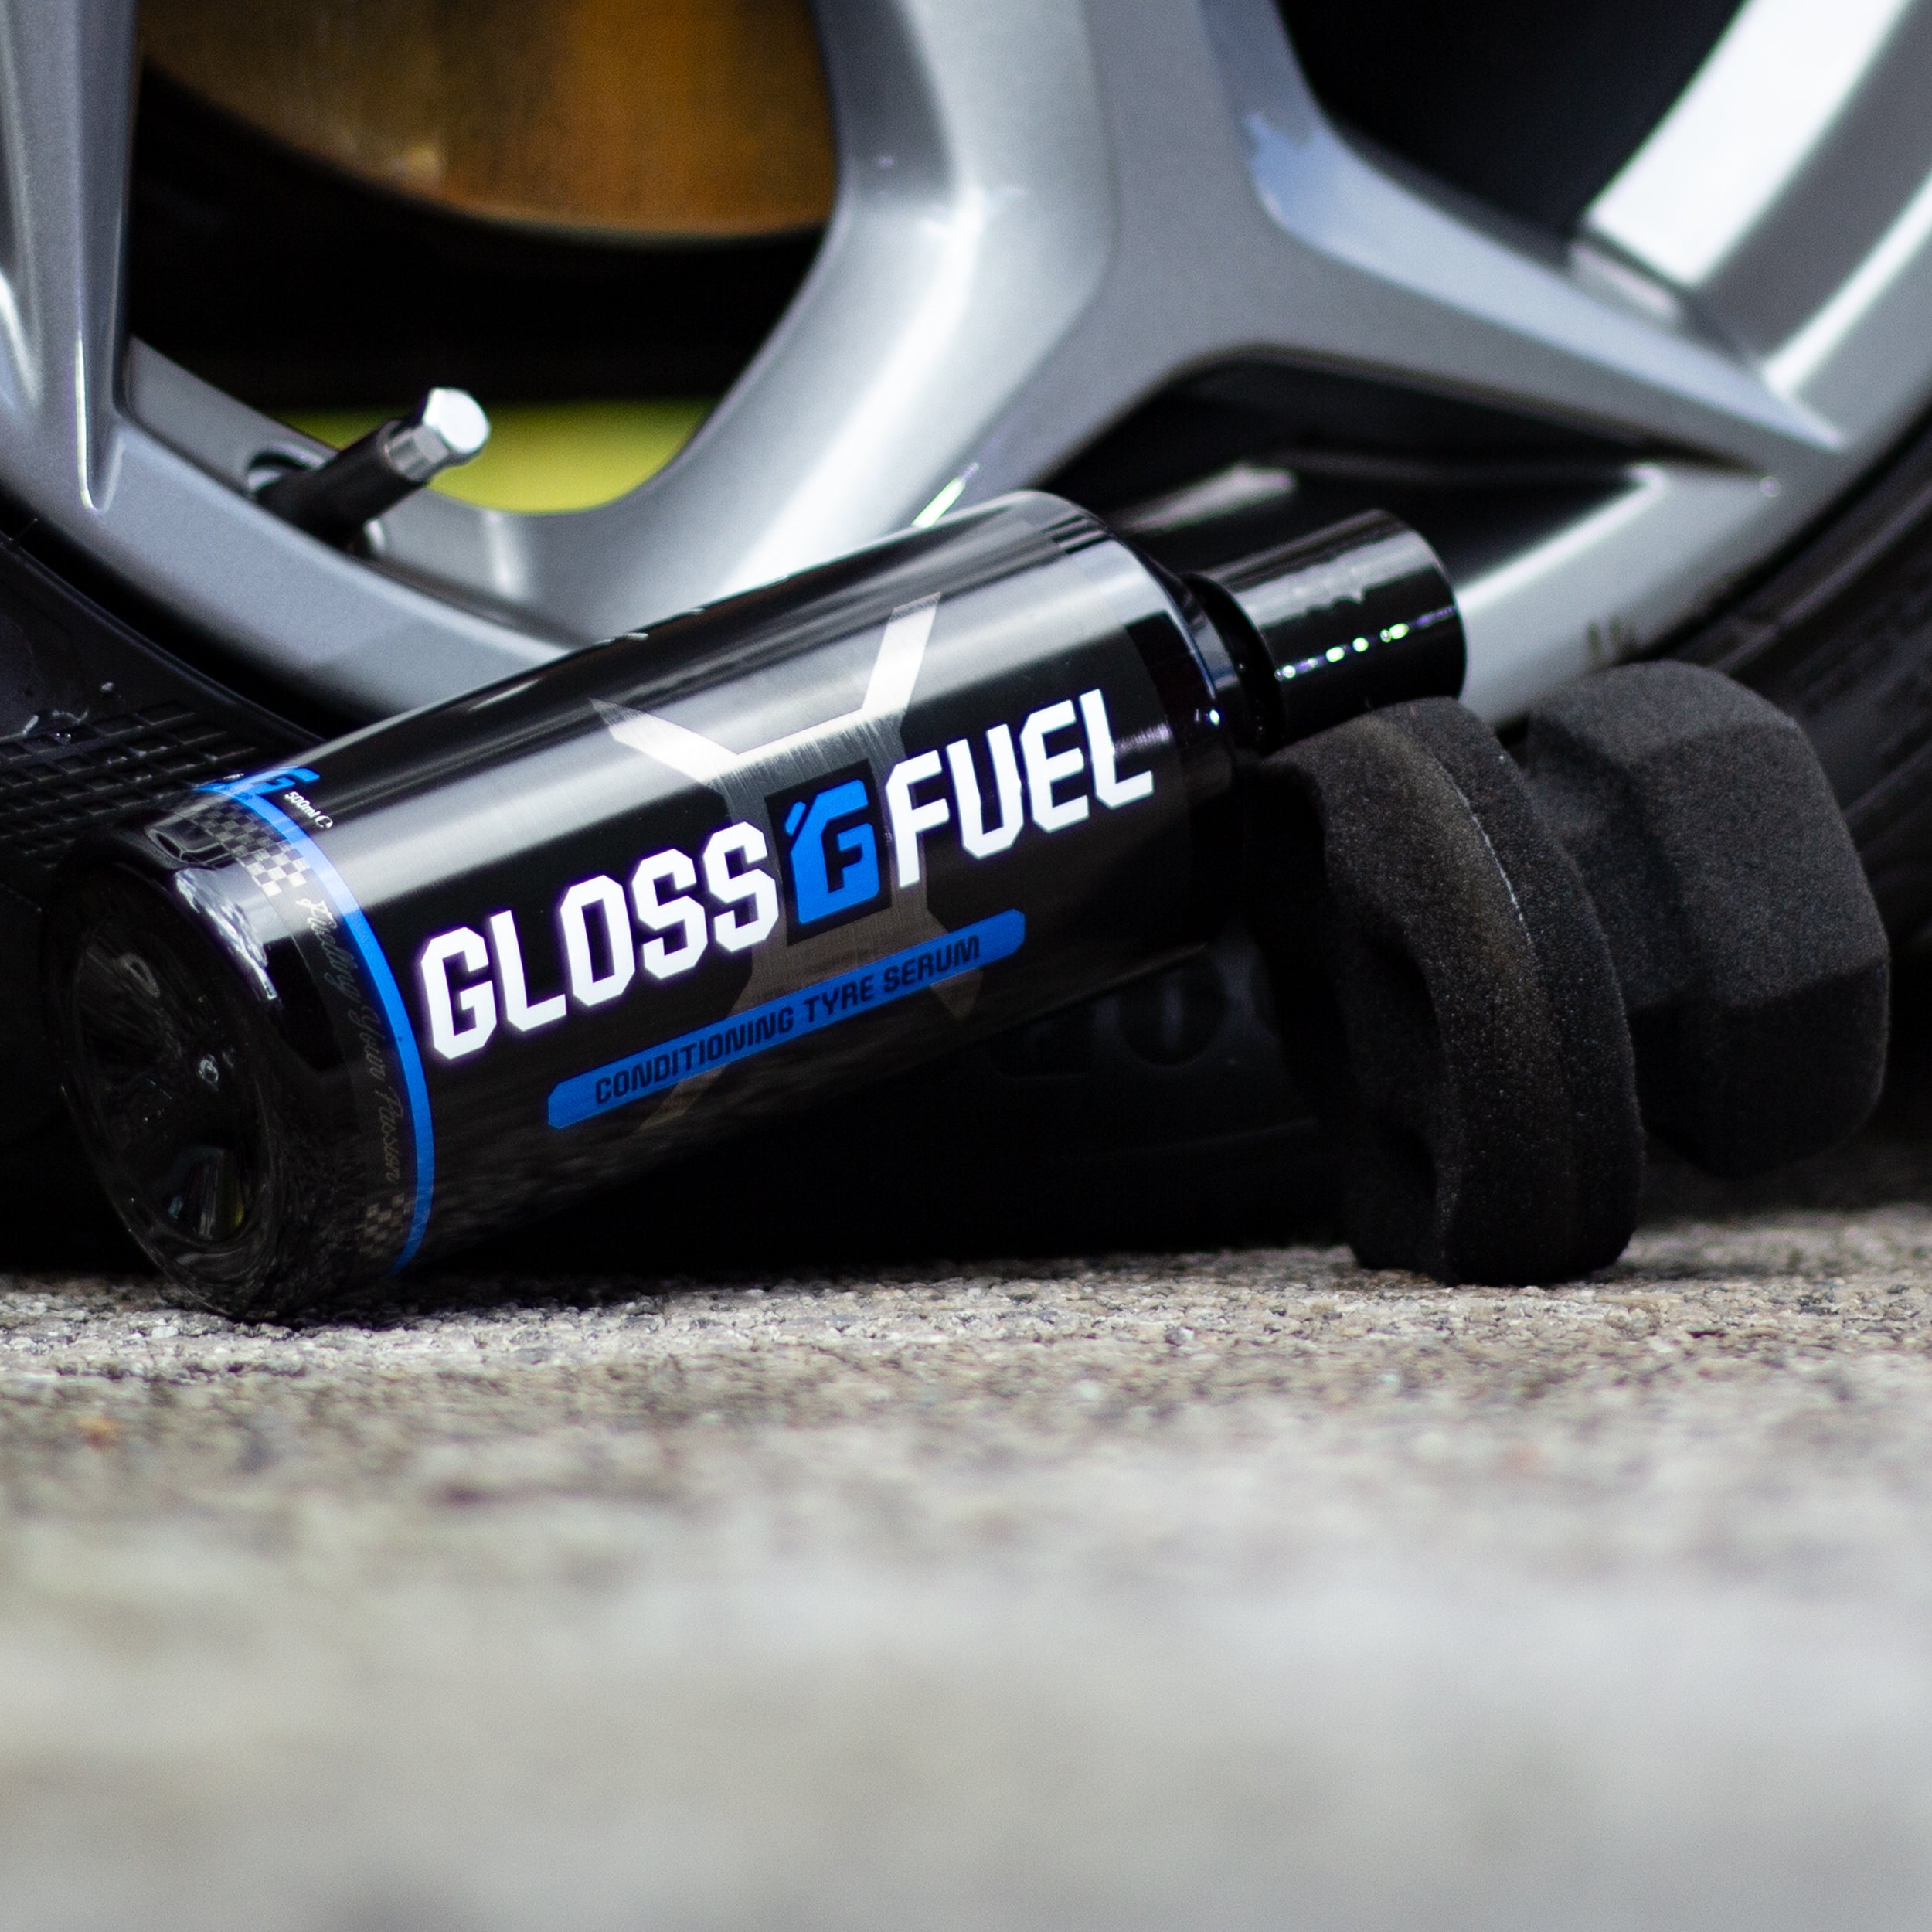 Gloss Fuel Conditioning Tyre Serum Bottle next to a Ford Focus ST Alloy Wheel